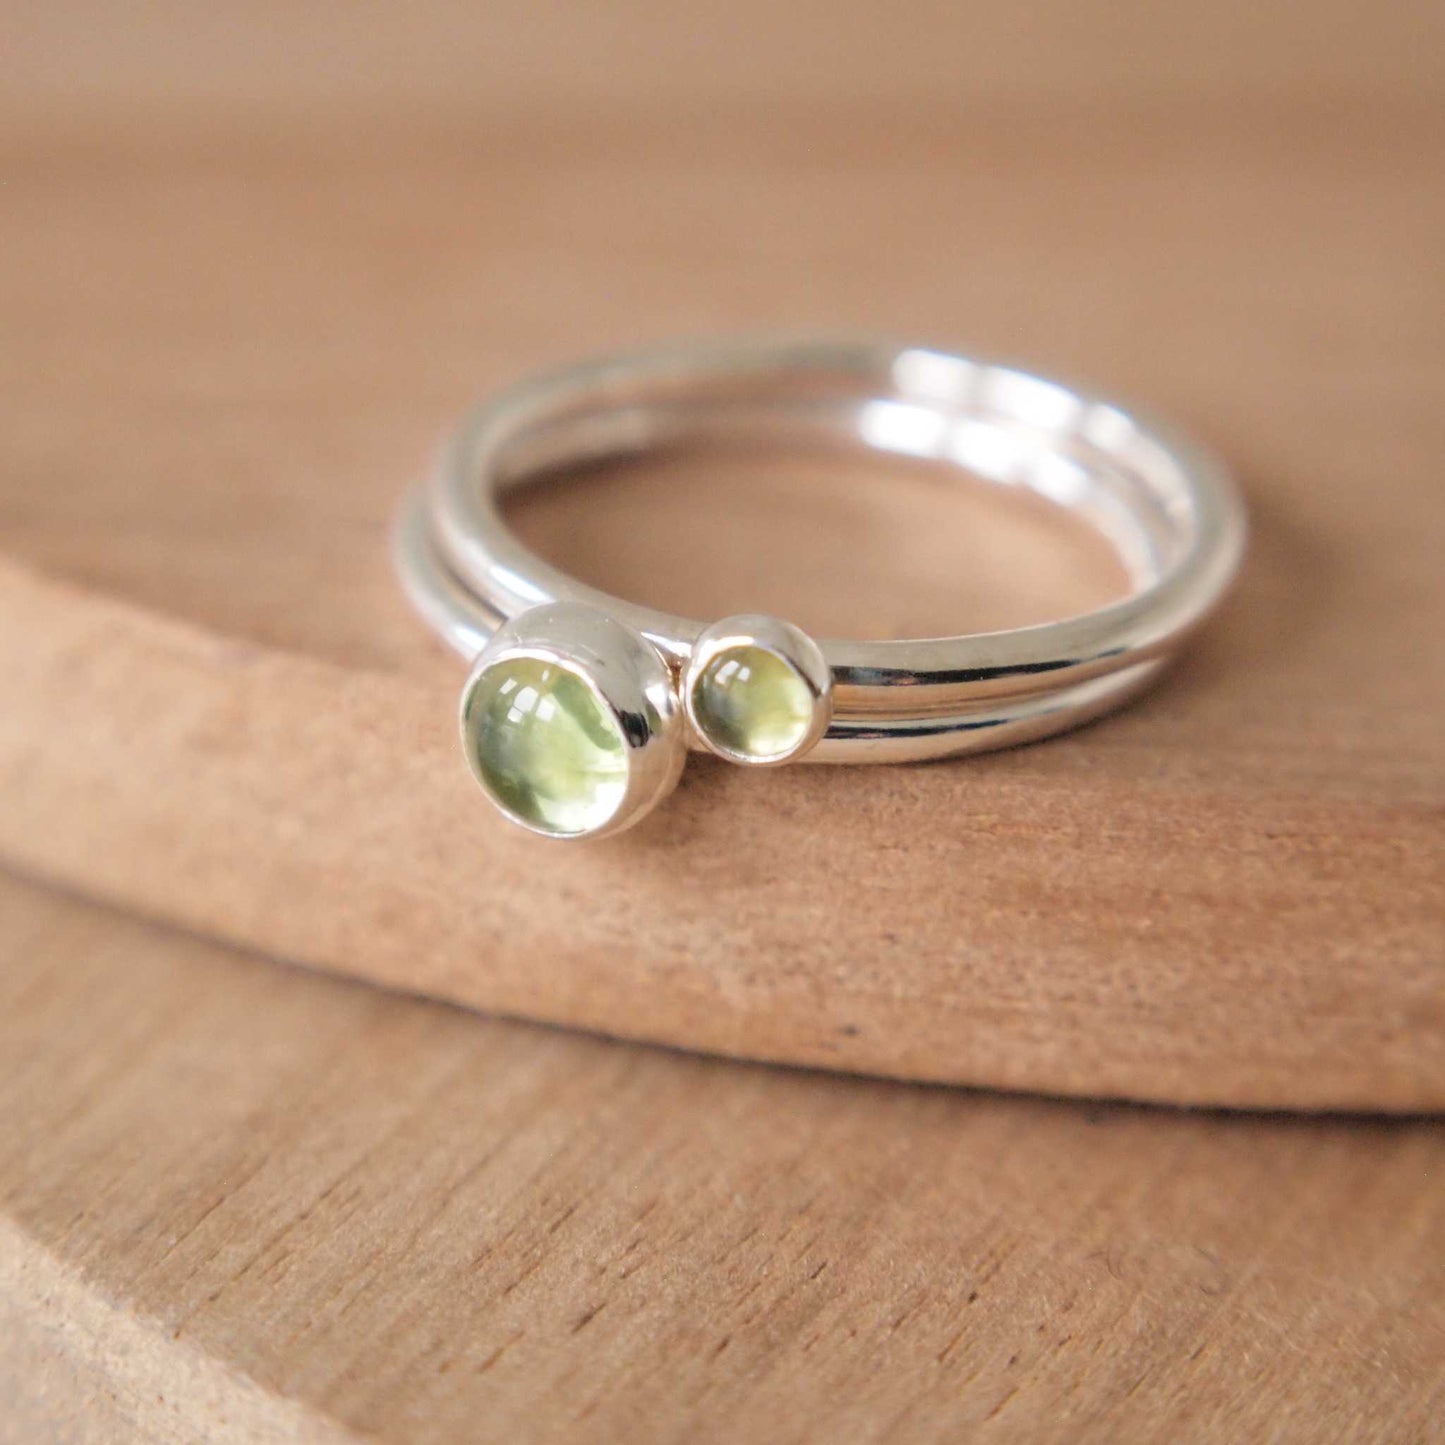 Peridot and Silver double ring set. Moss green round gemstone on silver bands in a 3mm and 5mm size. Handmade in Scotland by maram jewellery